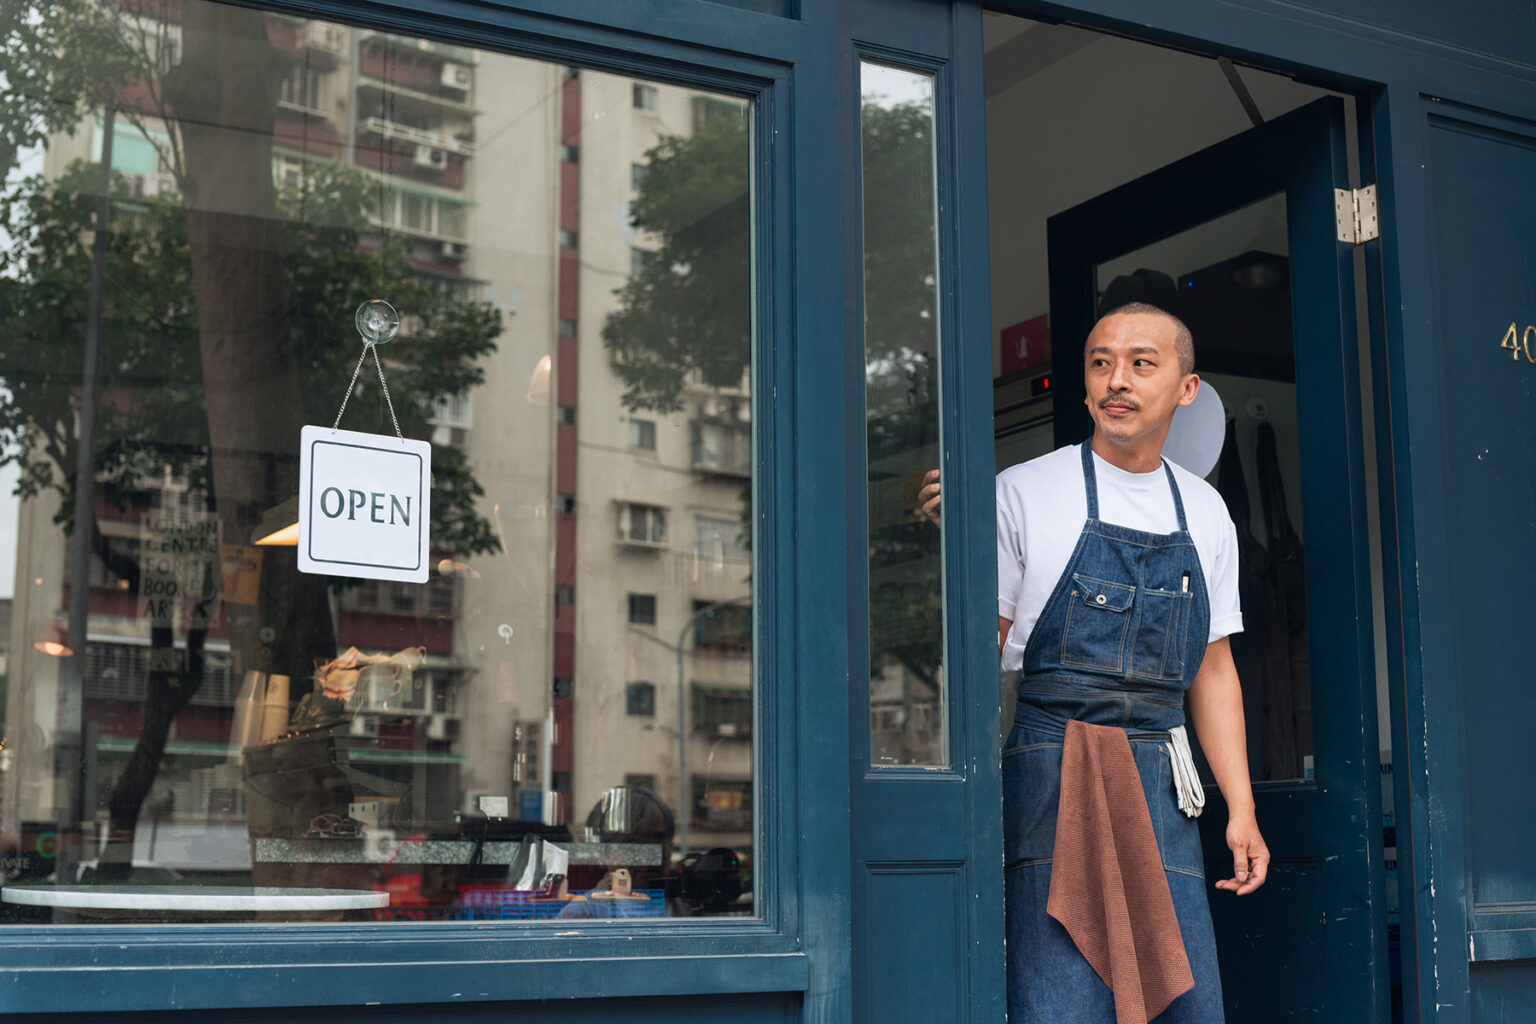 A business owner looks out the door onto the street as he opens his shop for the day